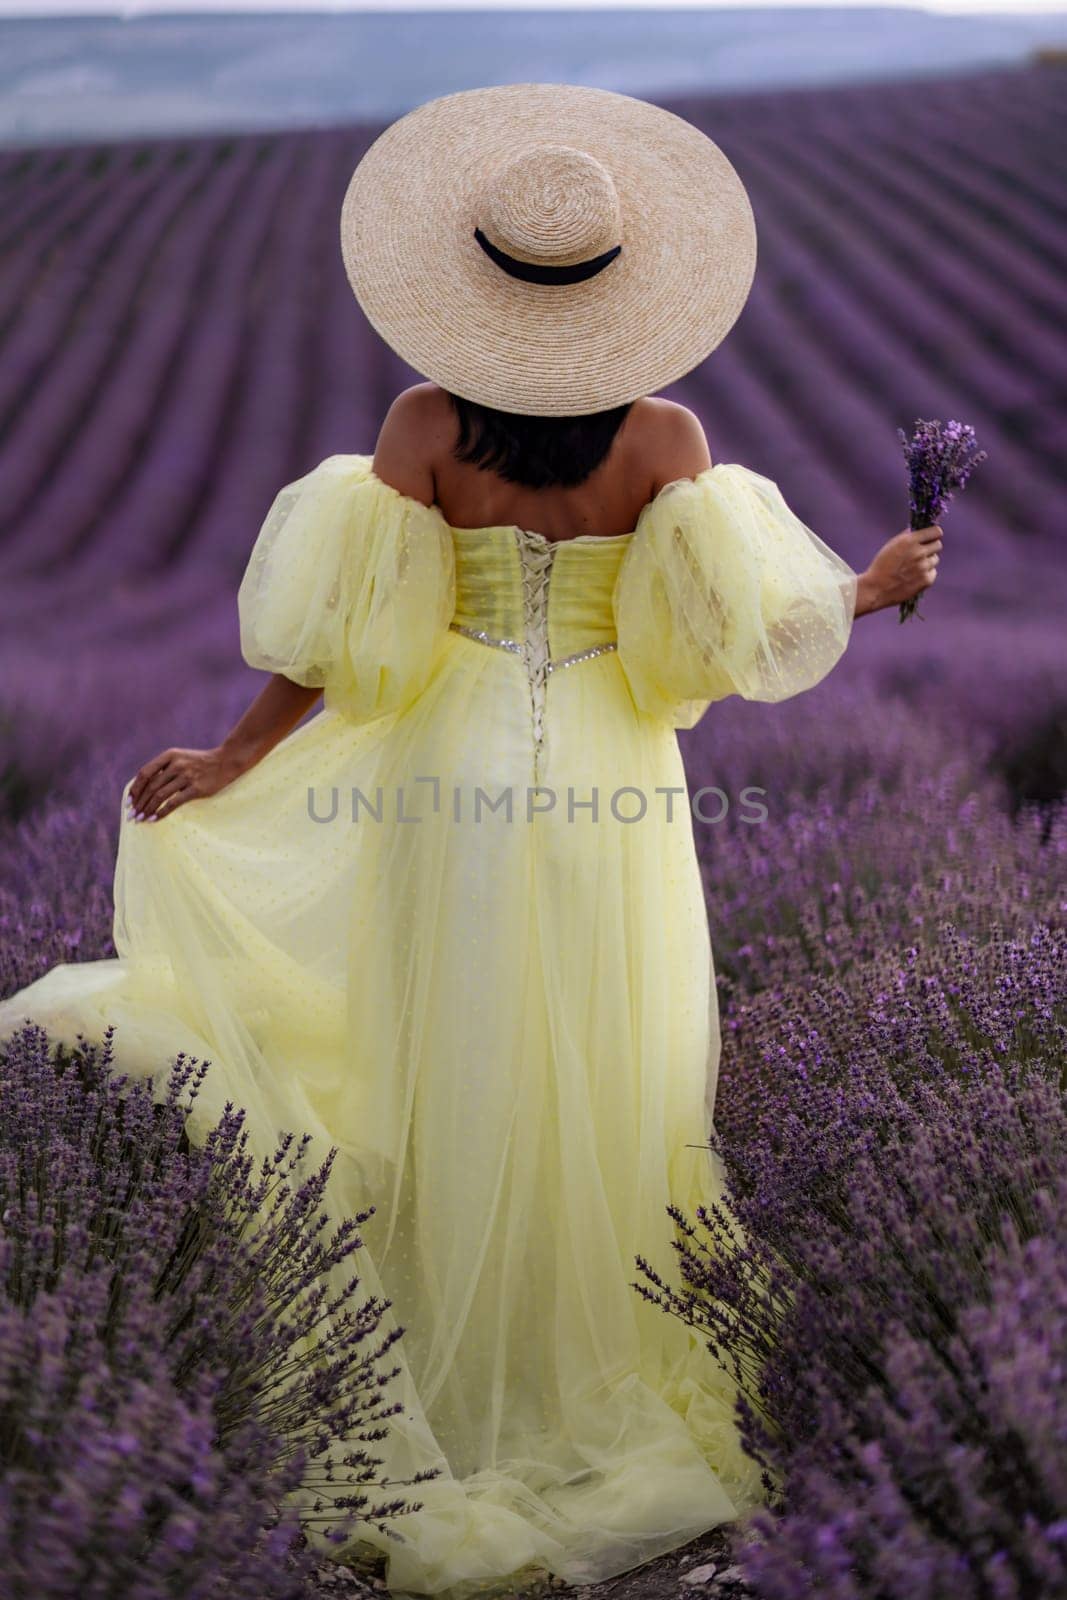 Woman lavender field. Lavender field happy woman in yellow dress in lavender field summer time. Aromatherapy concept, lavender oil, photo session in lavender.